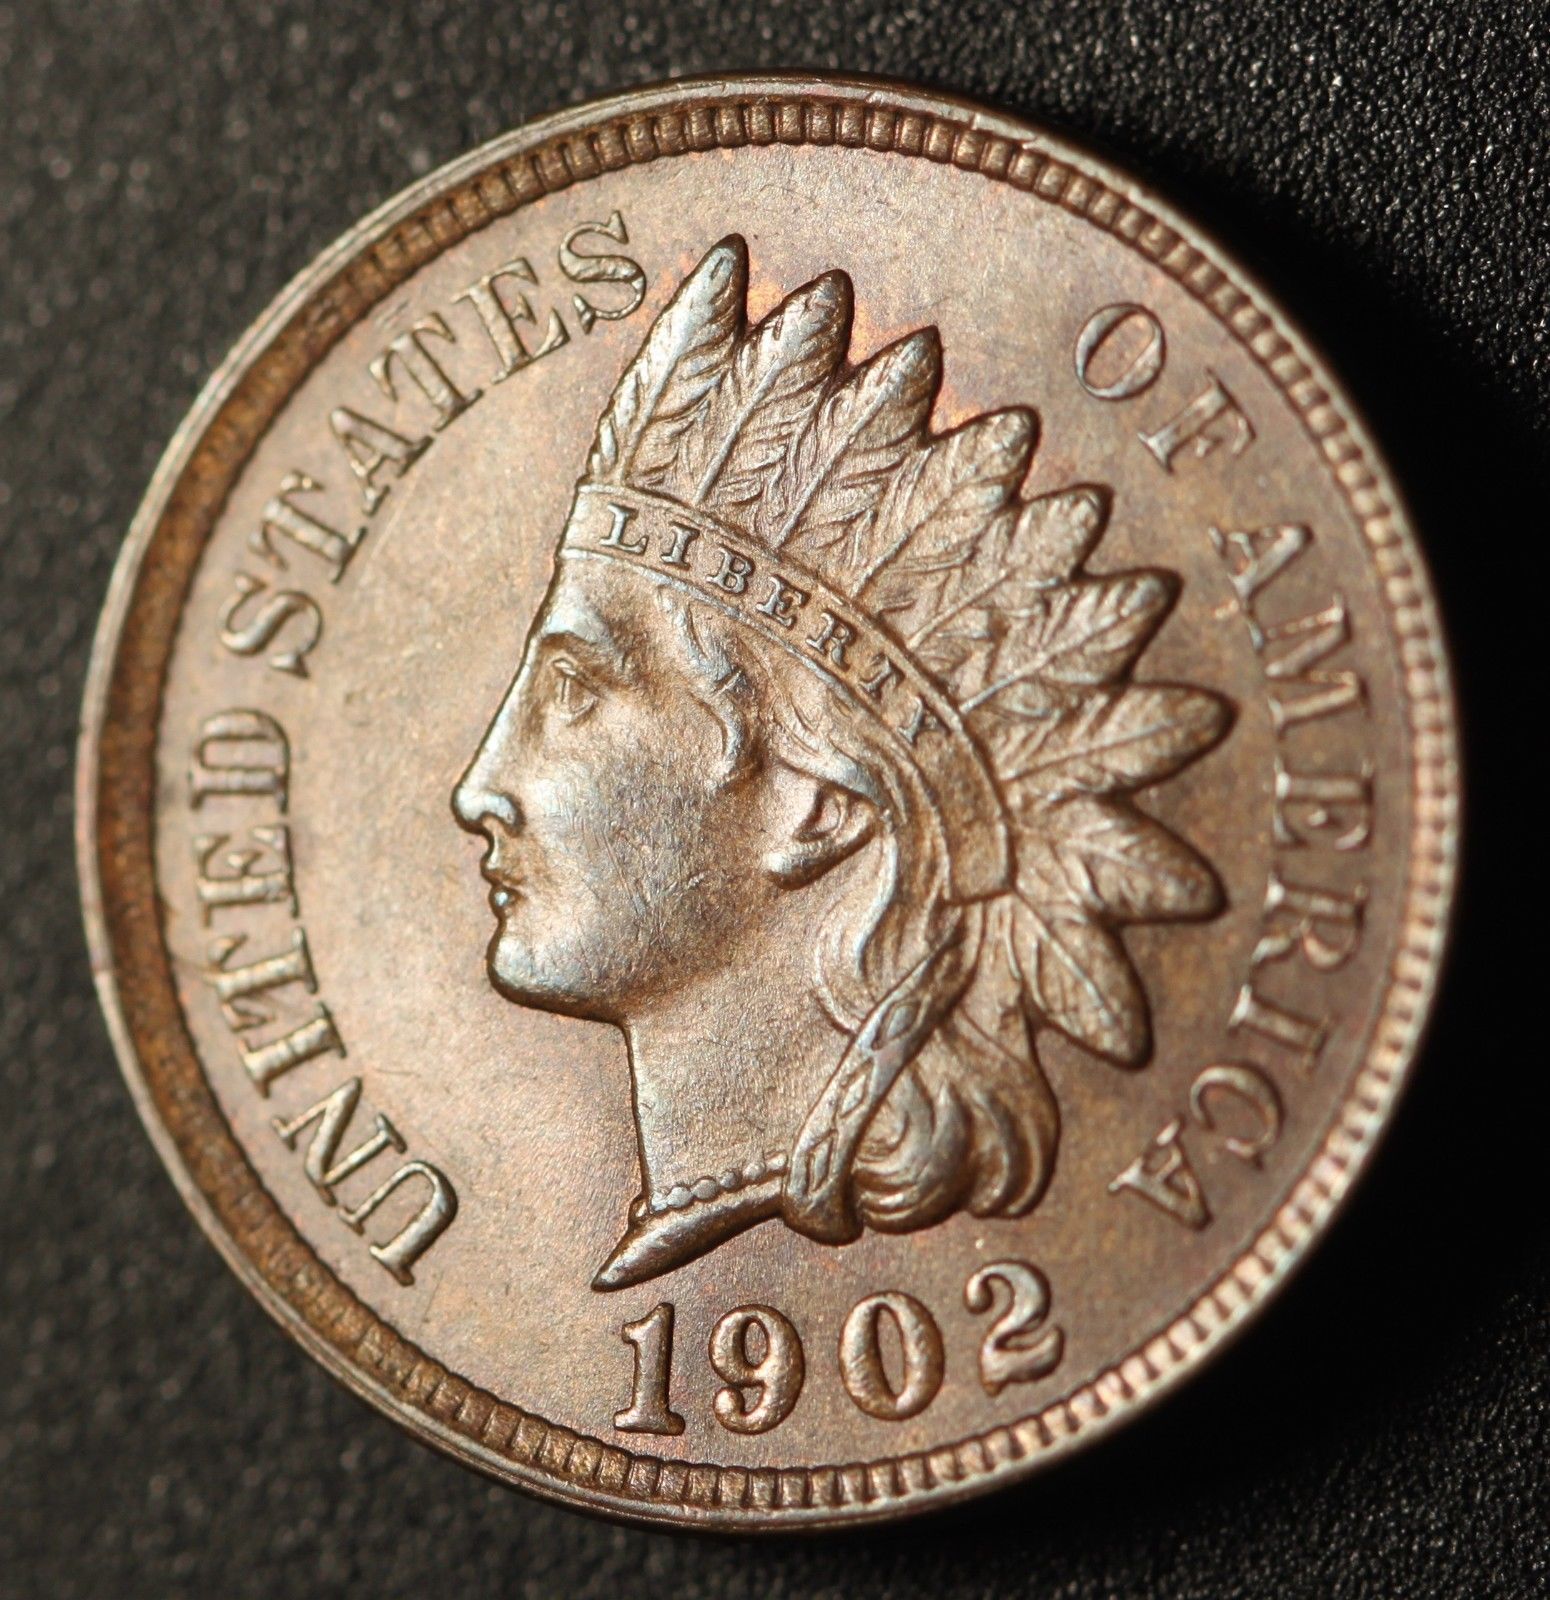 1902 ODD-002 - Indian Head Penny - Photo by Ed Nathanson